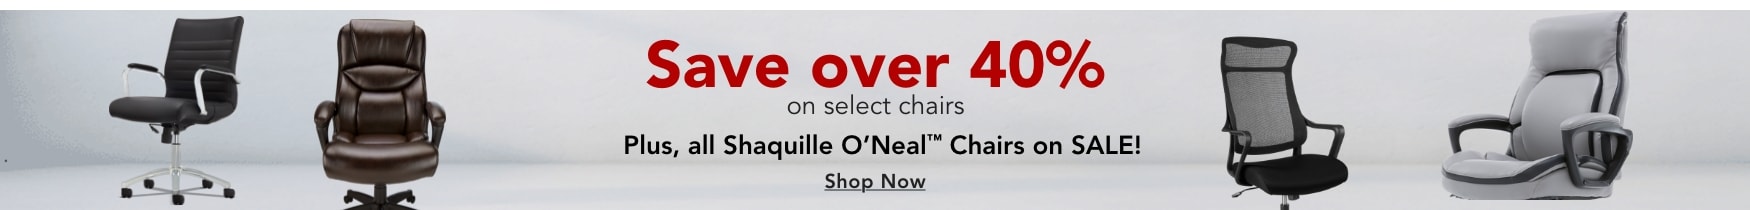 Save over 40% on select chairs